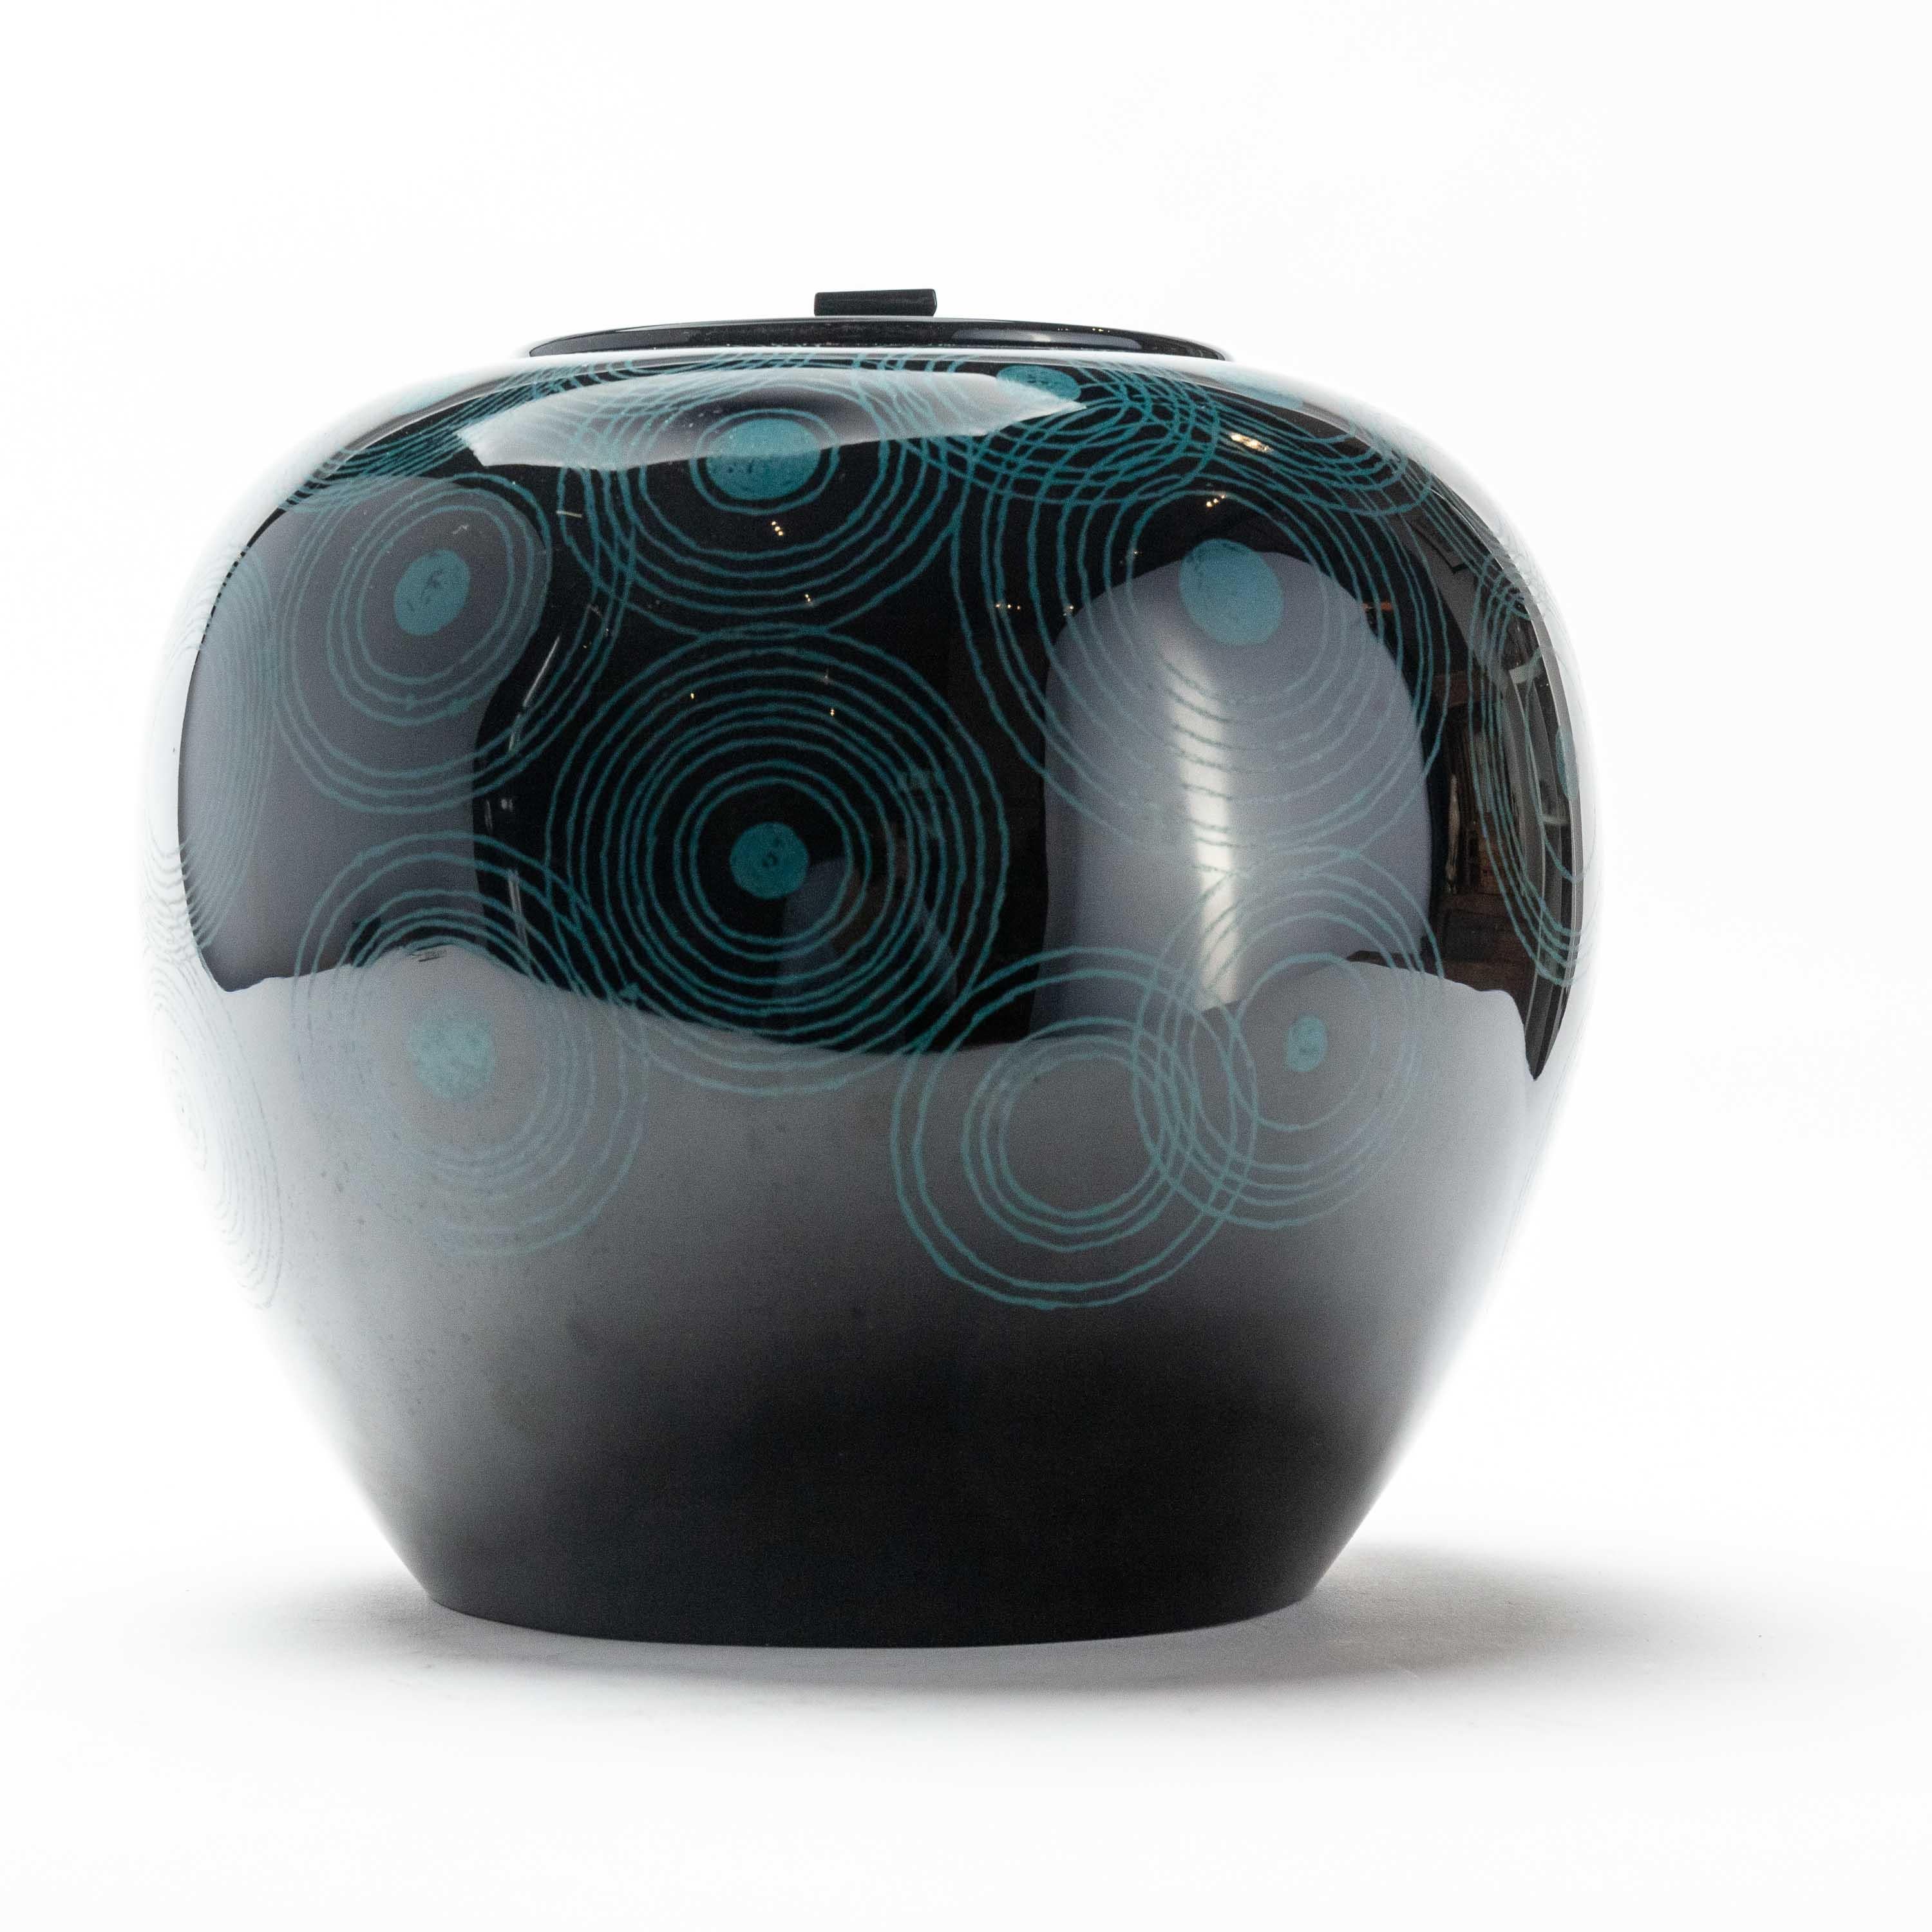 A stunning and curvaceous black lacquer mizusashi from Japan. Mizusashi are used in Japanese tea ceremony, as water containers. They are one of the main aesthetic components for a host to consider. This one features a stylish concentric circle